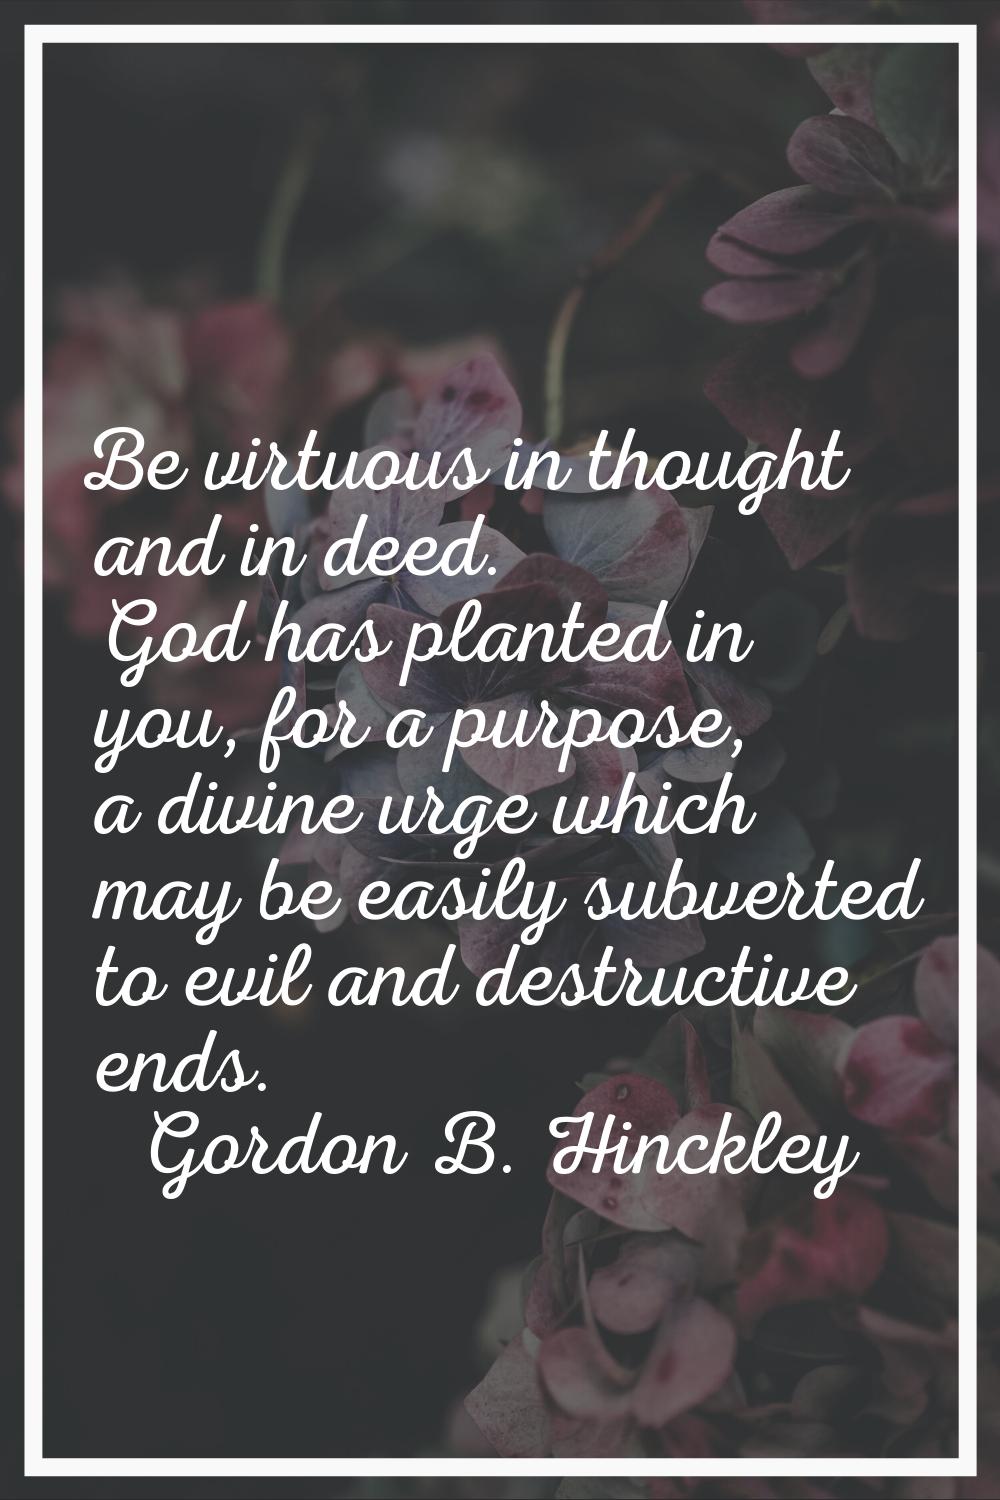 Be virtuous in thought and in deed. God has planted in you, for a purpose, a divine urge which may 